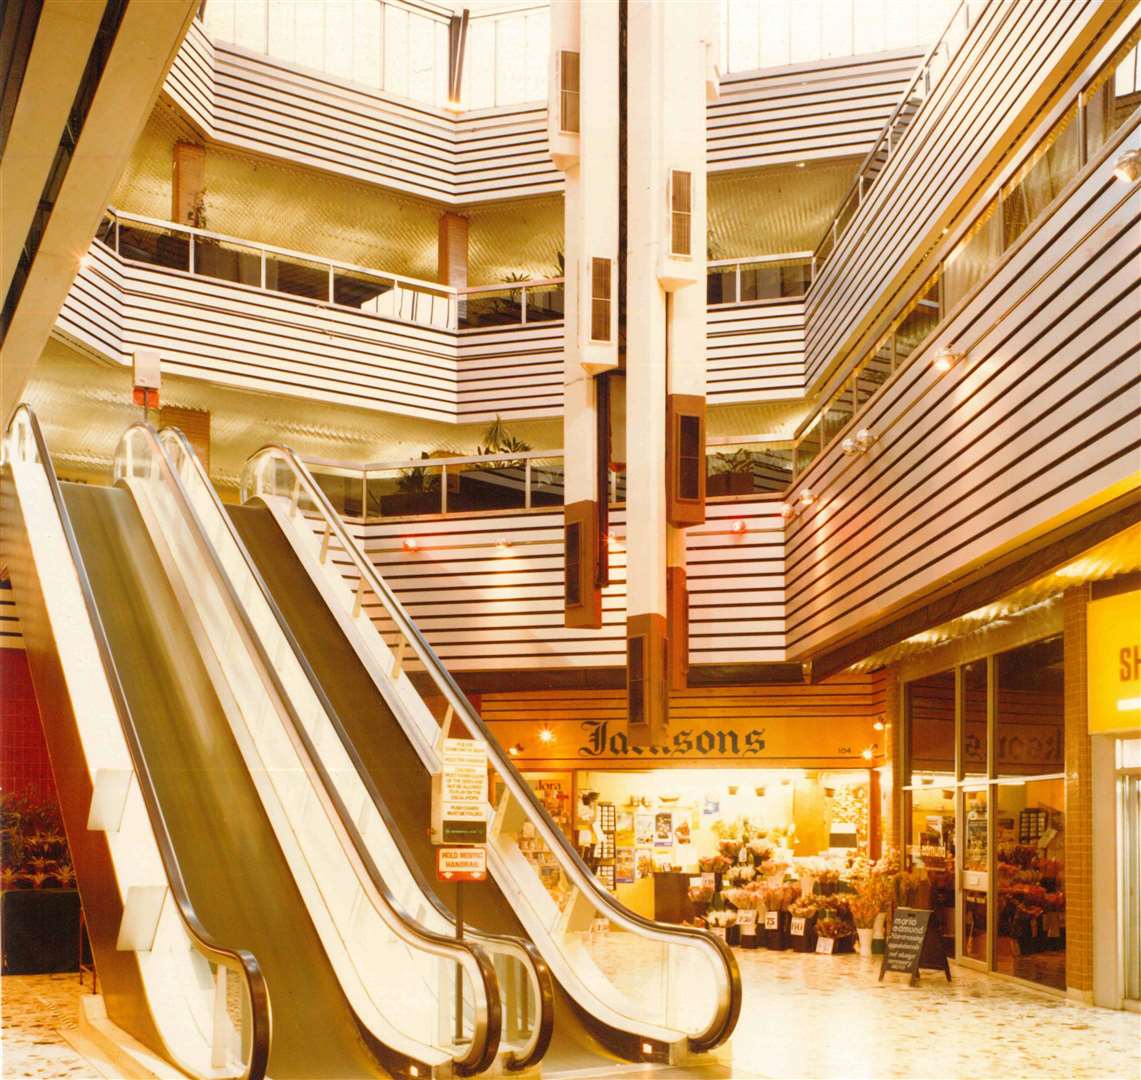 The Stoneborough Centre, in 1978, not long after it opened. Copyright: Unknown